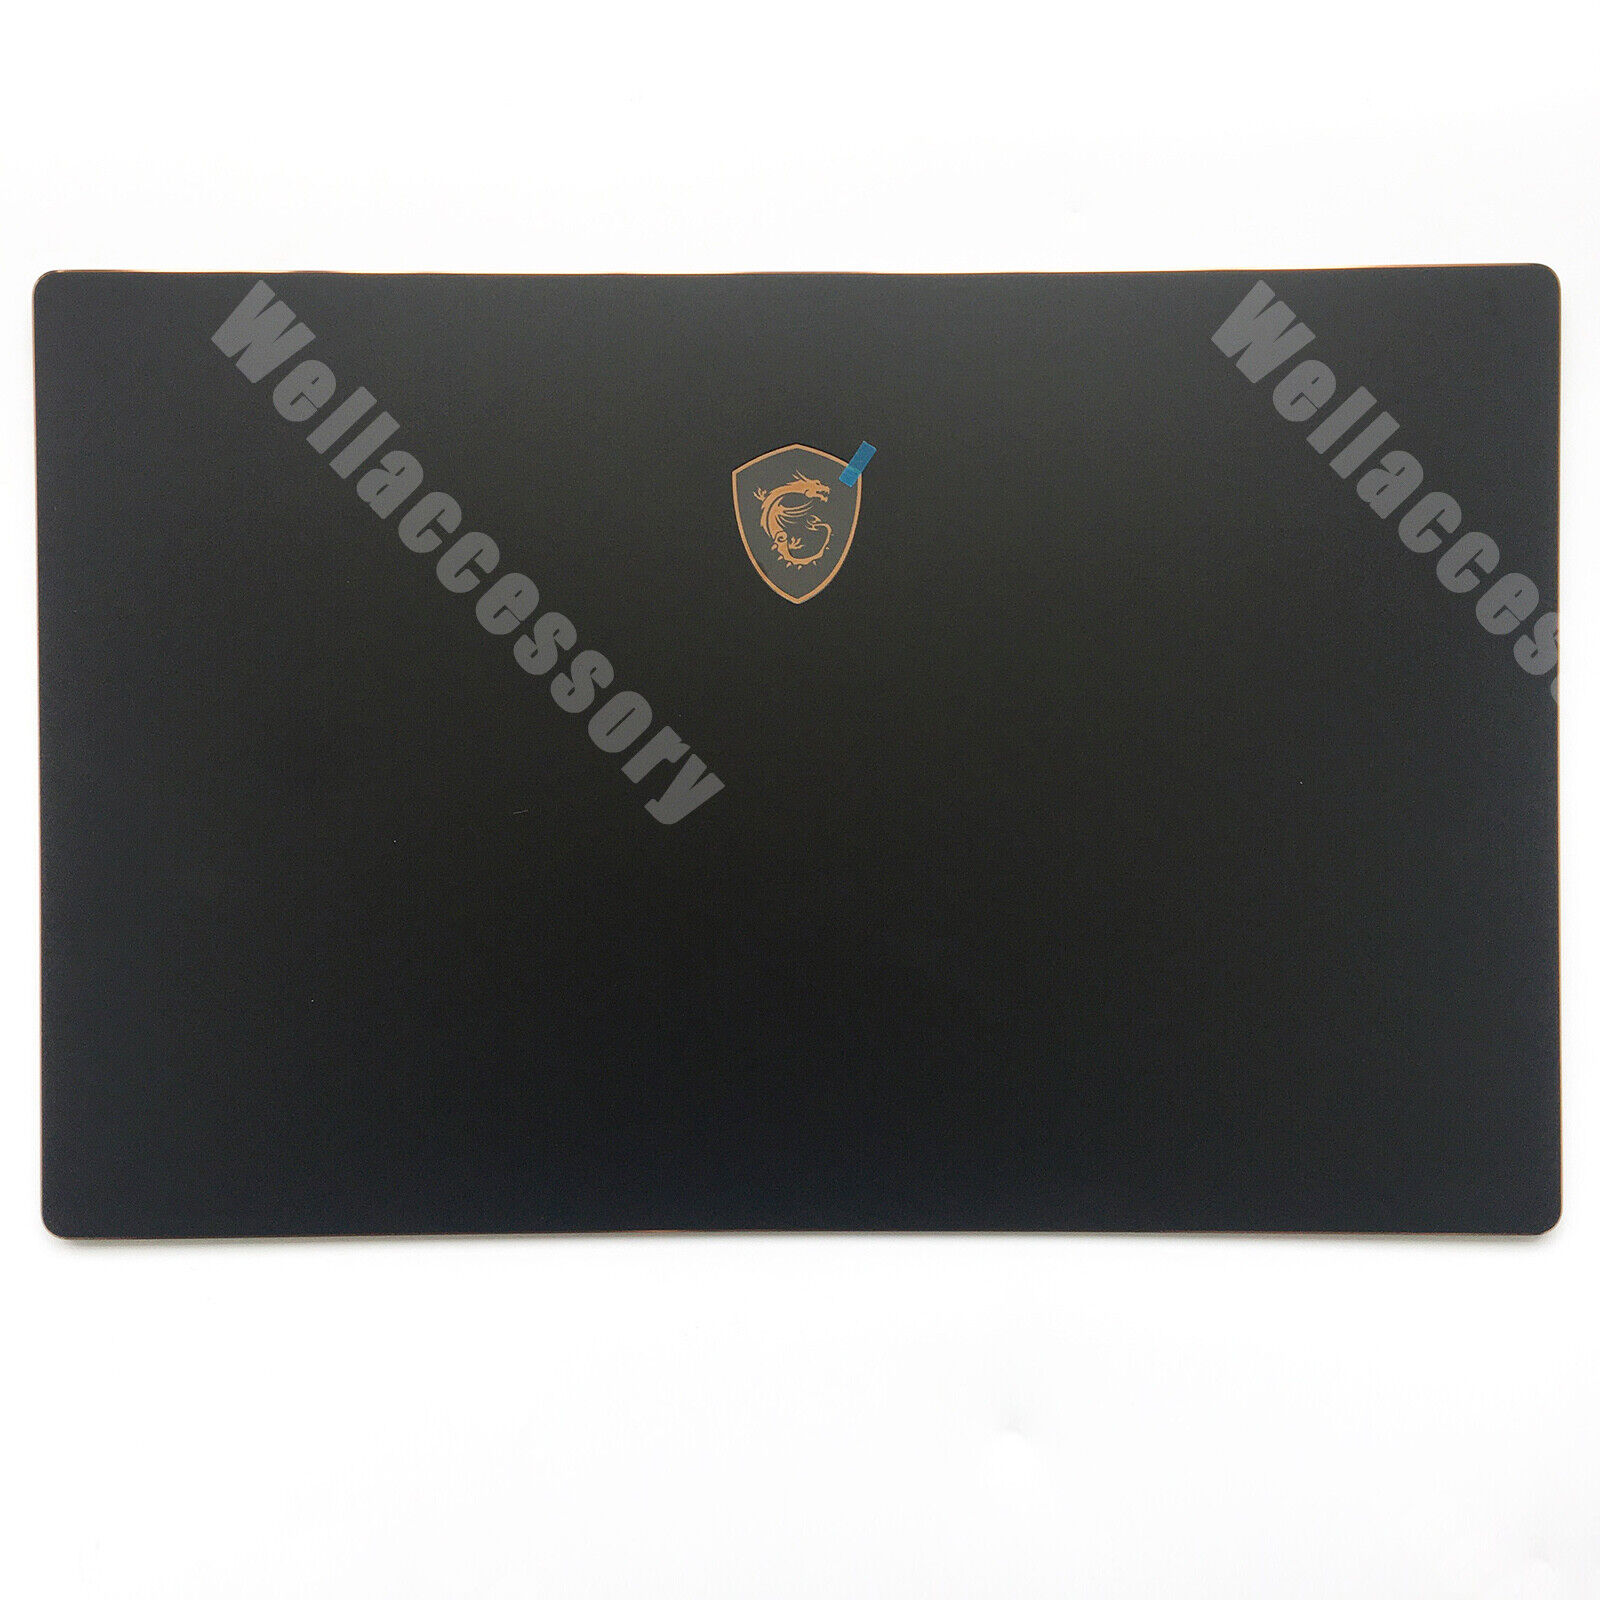 NEW For MSI GS75 STEALTH MS-17G1 LCD Back Cover Top Case 3077G1A211 US